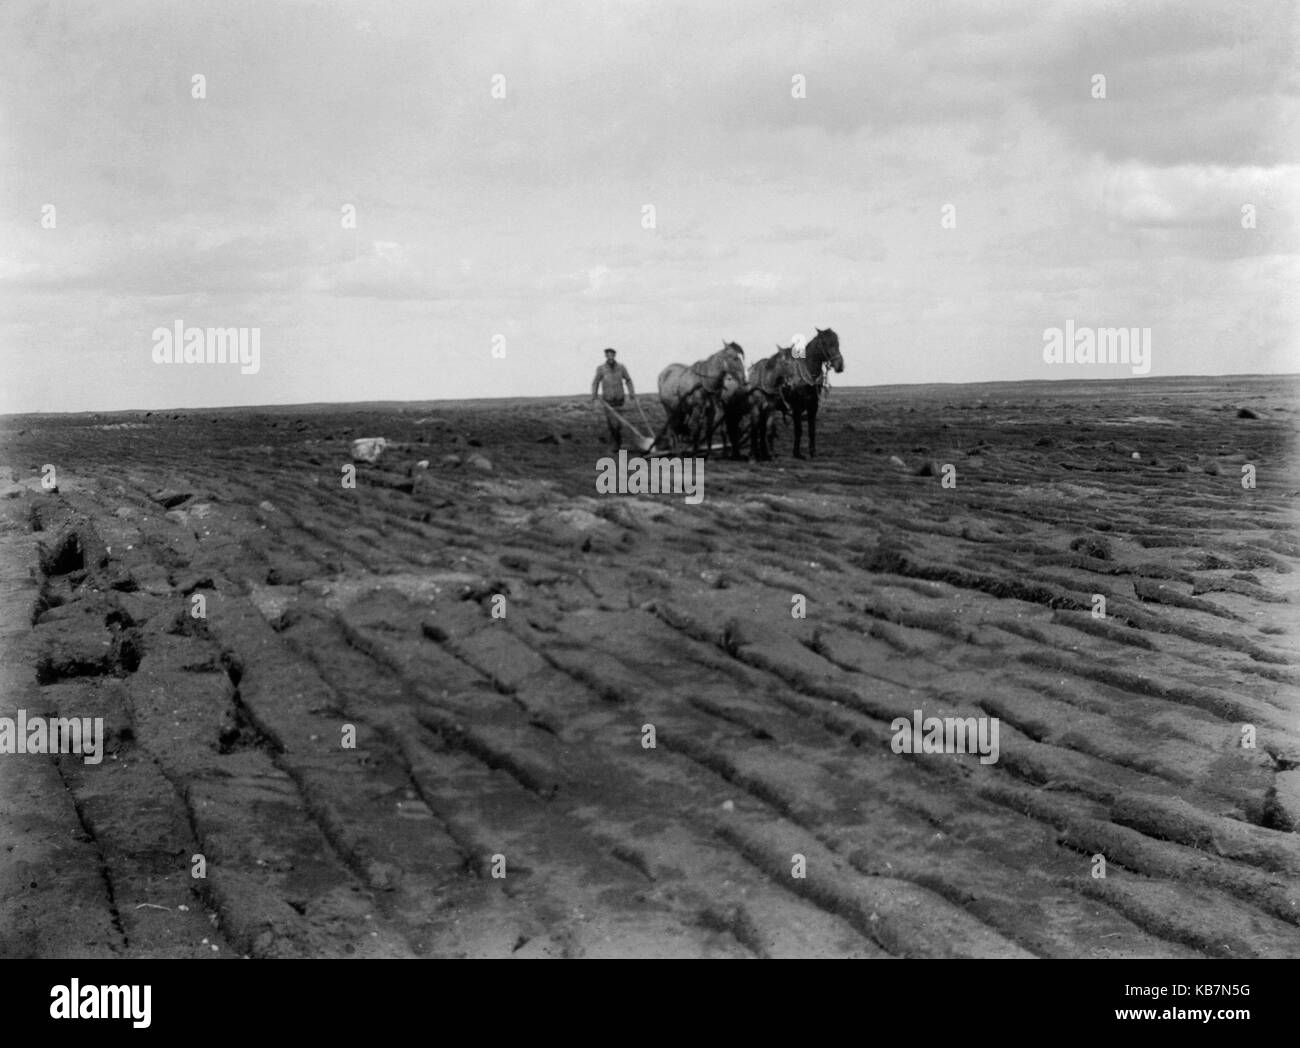 AJAXNETPHOTO. 1903. CANADA, EXACT LOCATION UNKNOWN.  - TURNING THE EARTH - MAN DRIVING A TEAM OF THREE HORSES TOWING A PLOUGH. PHOTOGRAPHER:UNKNOWN © DIGITAL IMAGE COPYRIGHT AJAX VINTAGE PICTURE LIBRARY SOURCE: AJAX VINTAGE PICTURE LIBRARY COLLECTION REF:AVL 2073 Stock Photo